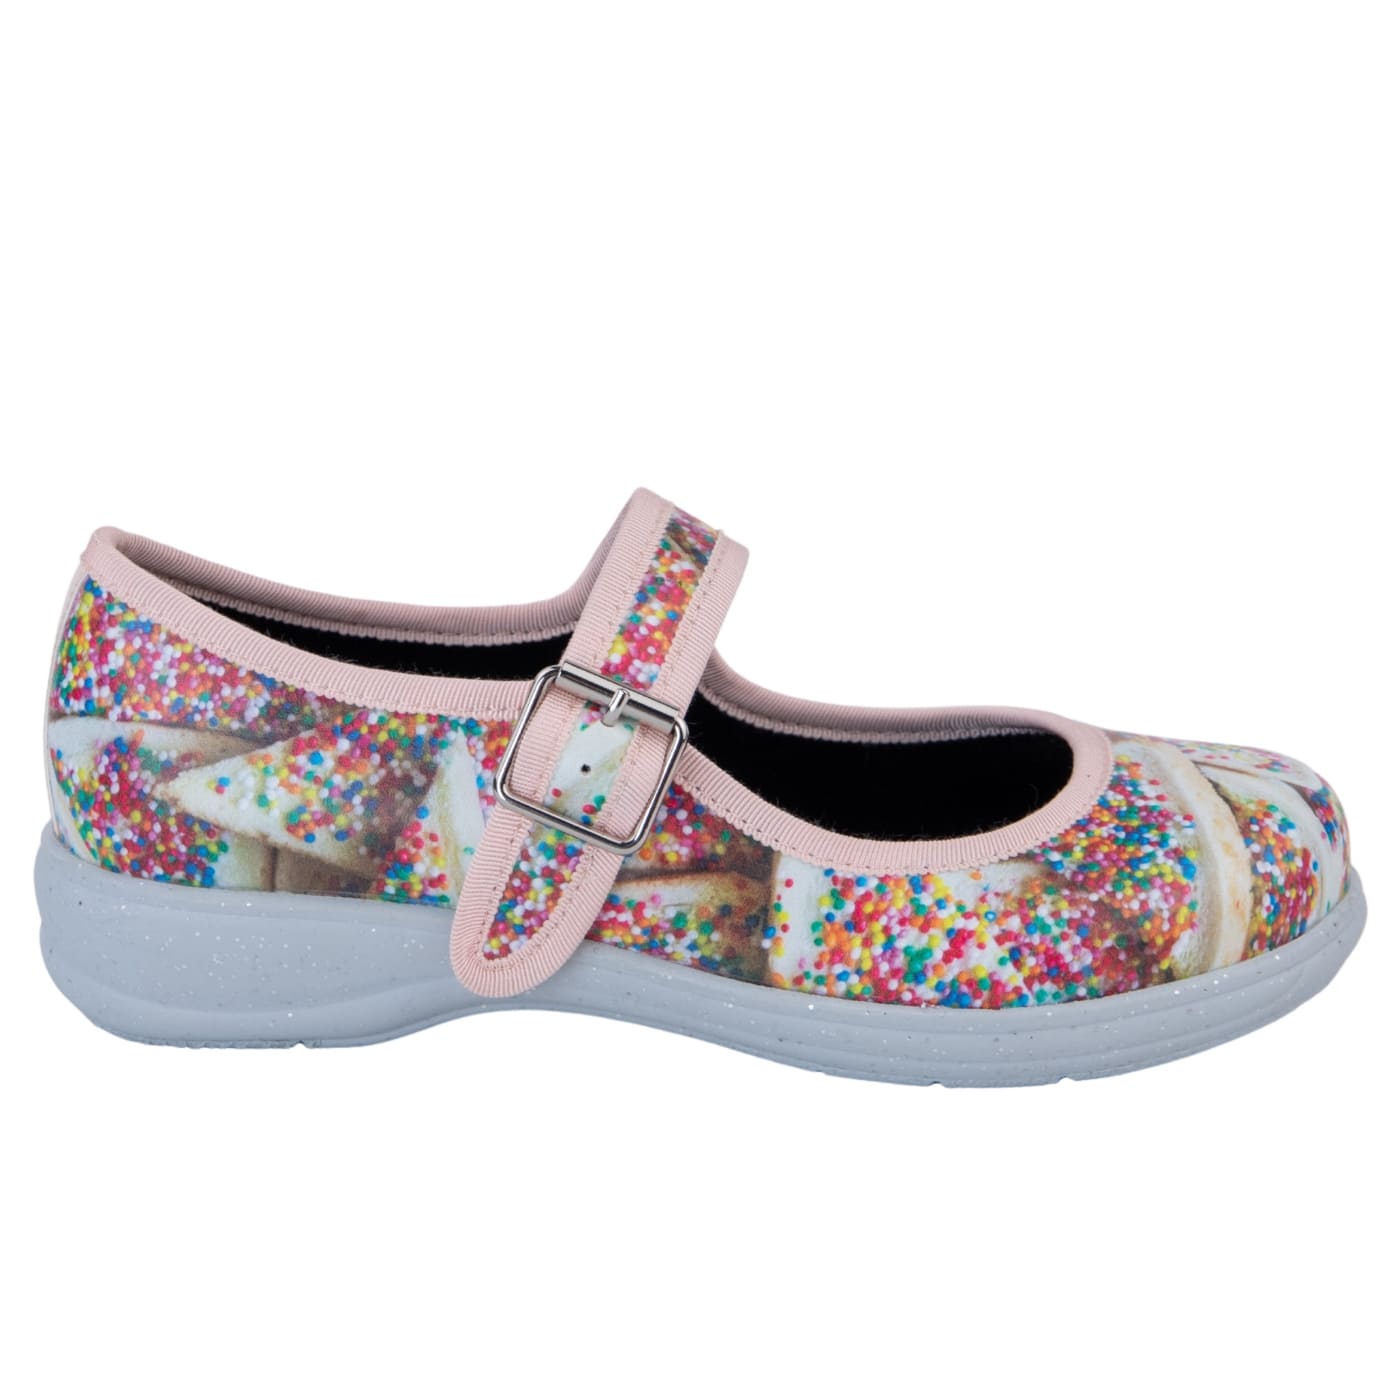 Sprinkles Mary Janes by RainbowsAndFairies.com.au (Fairy Bread - 100s & 1000s - Mismatched Shoes - Glitter Soles - Glitter - Quirky) - SKU: FW_MARYJ_SPRNK_ORG - Pic-03